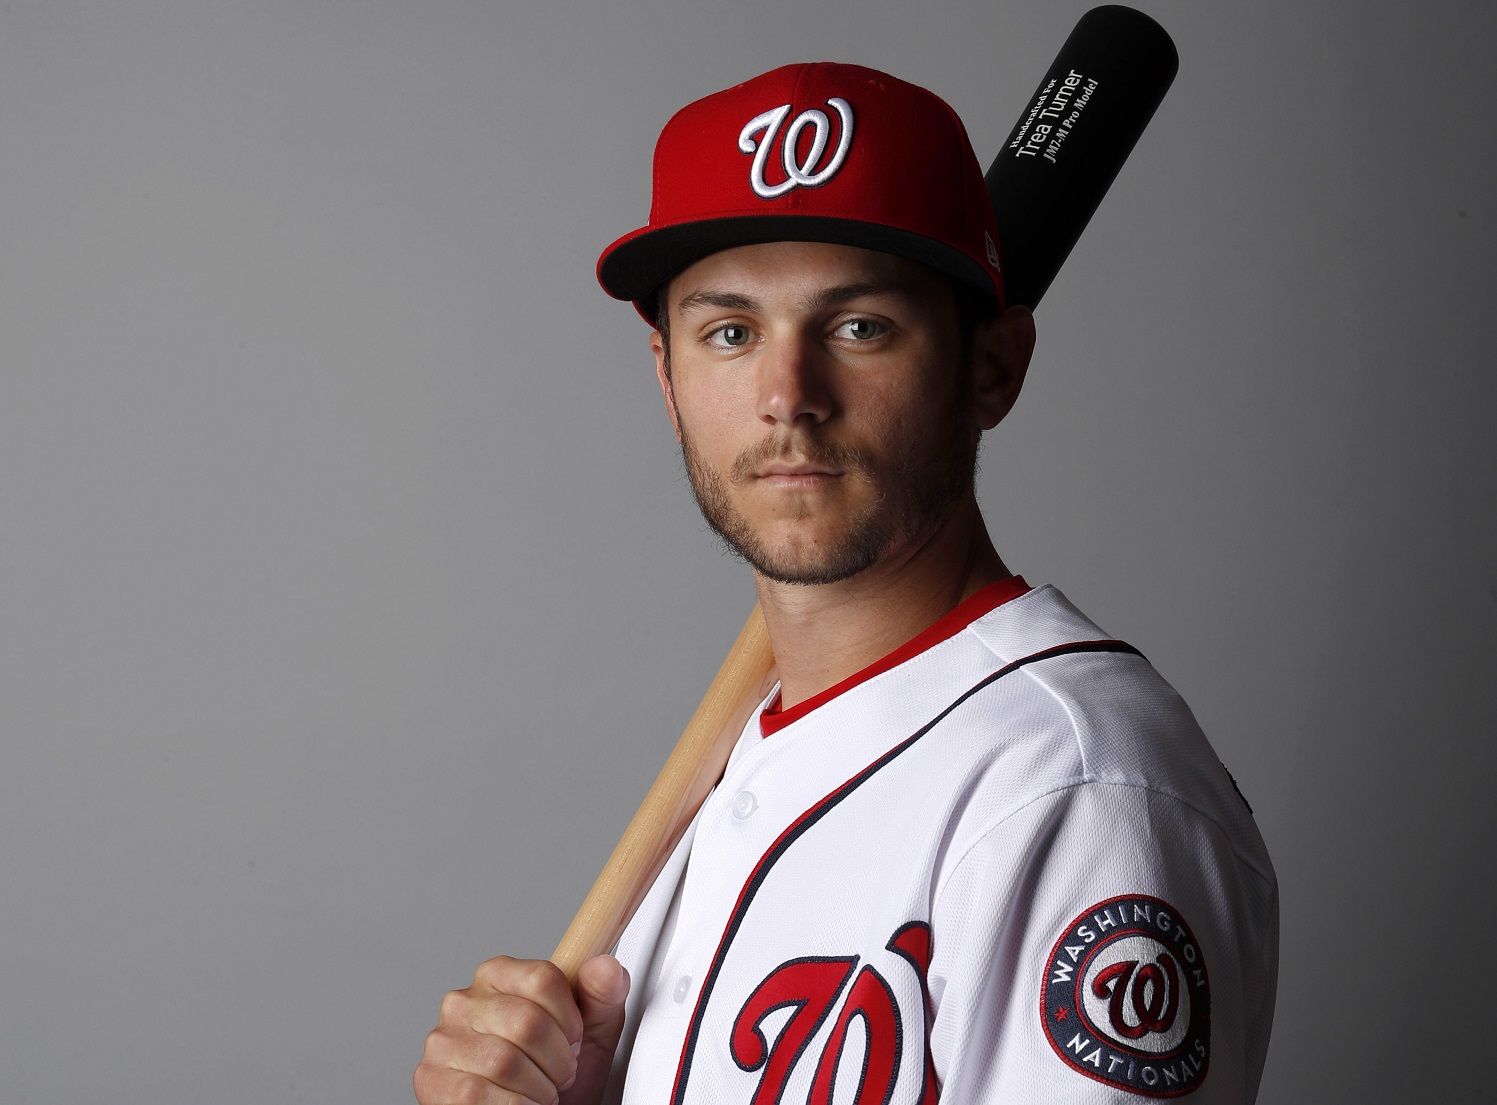 This is a 2018 photo of Trea Turner of the Washington Nationals baseball team. This image reflects the Nationals active roster as of Feb. 22, 2018 when this image was taken. (AP Photo/Jeff Roberson)